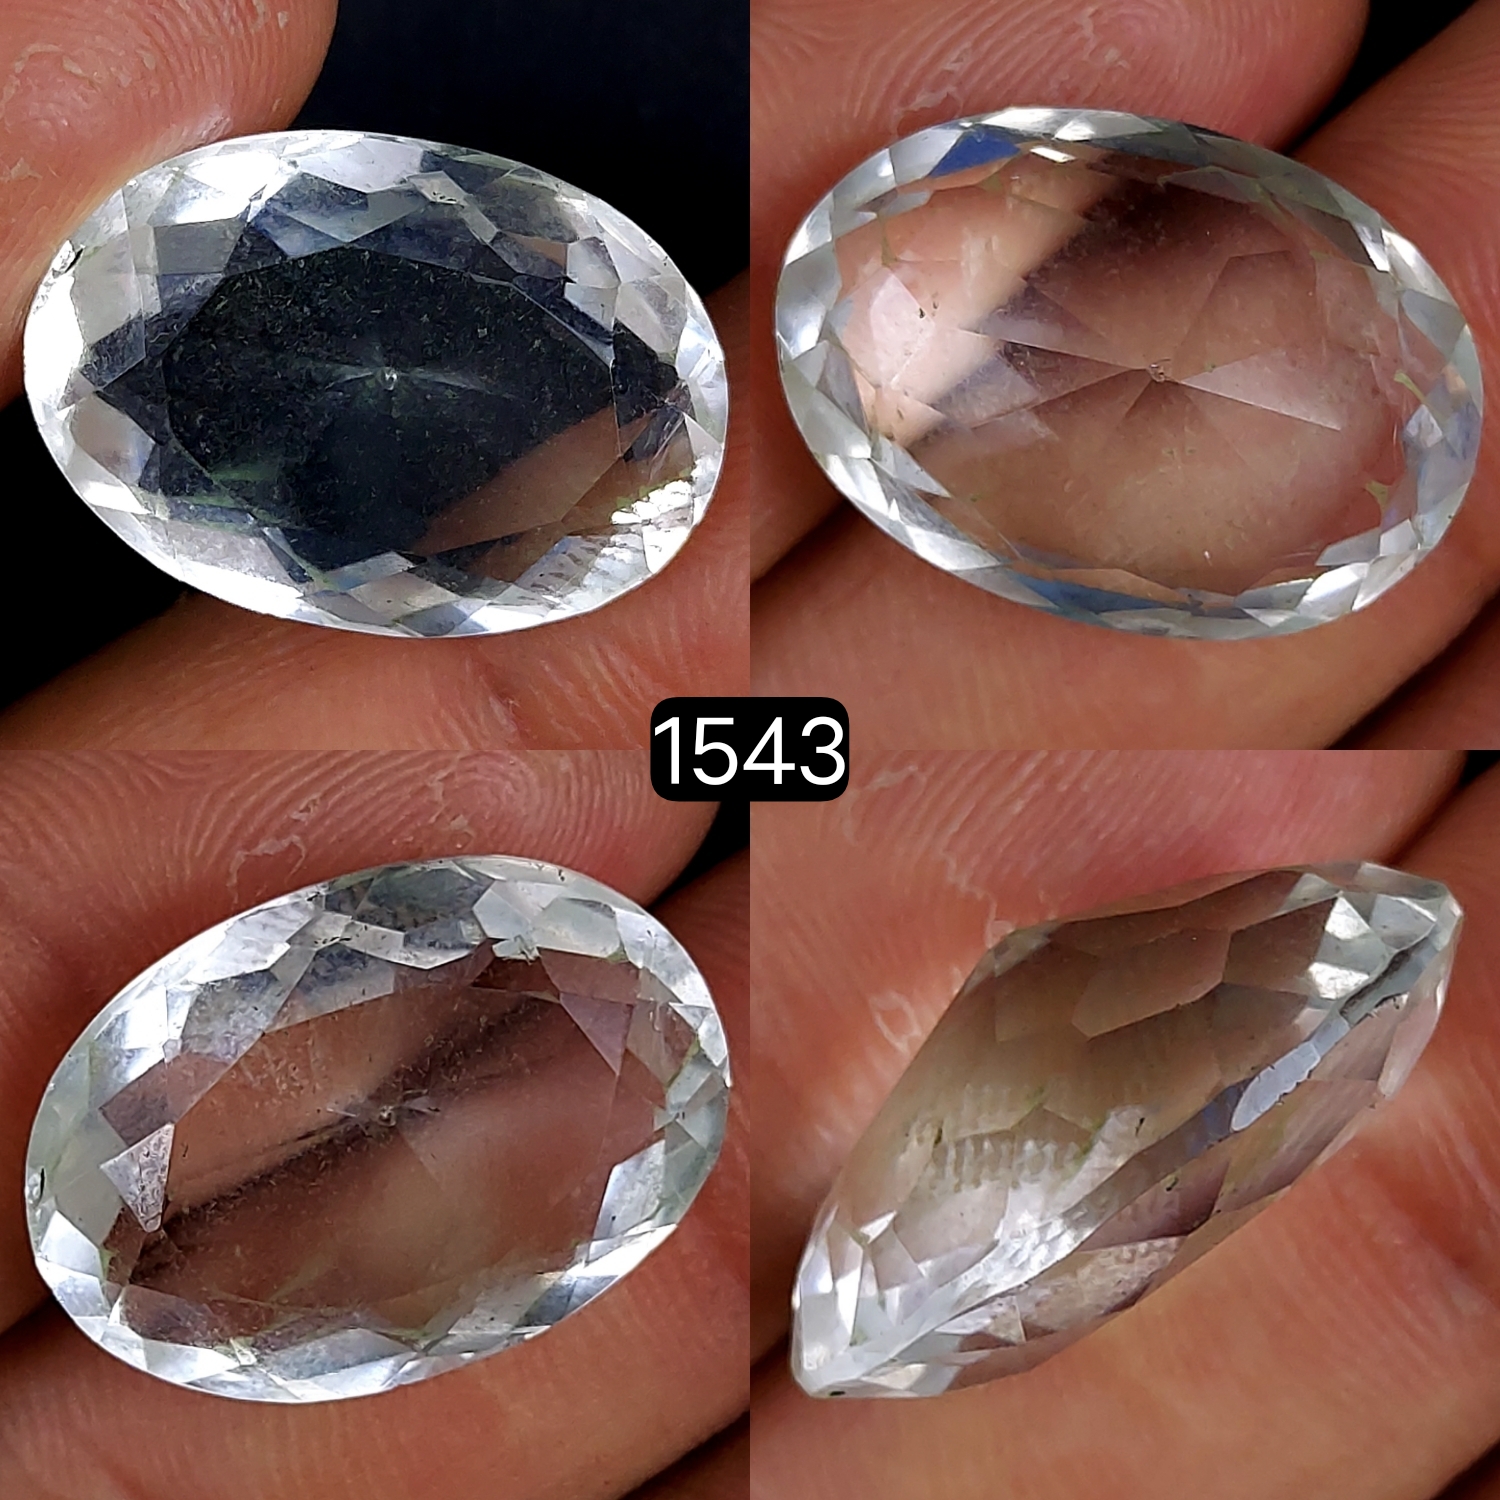 1Pc 23Cts Natural Crystal Quartz Faceted Cabochon Gemstone Oval Shape Crystal 24x16mm#1543